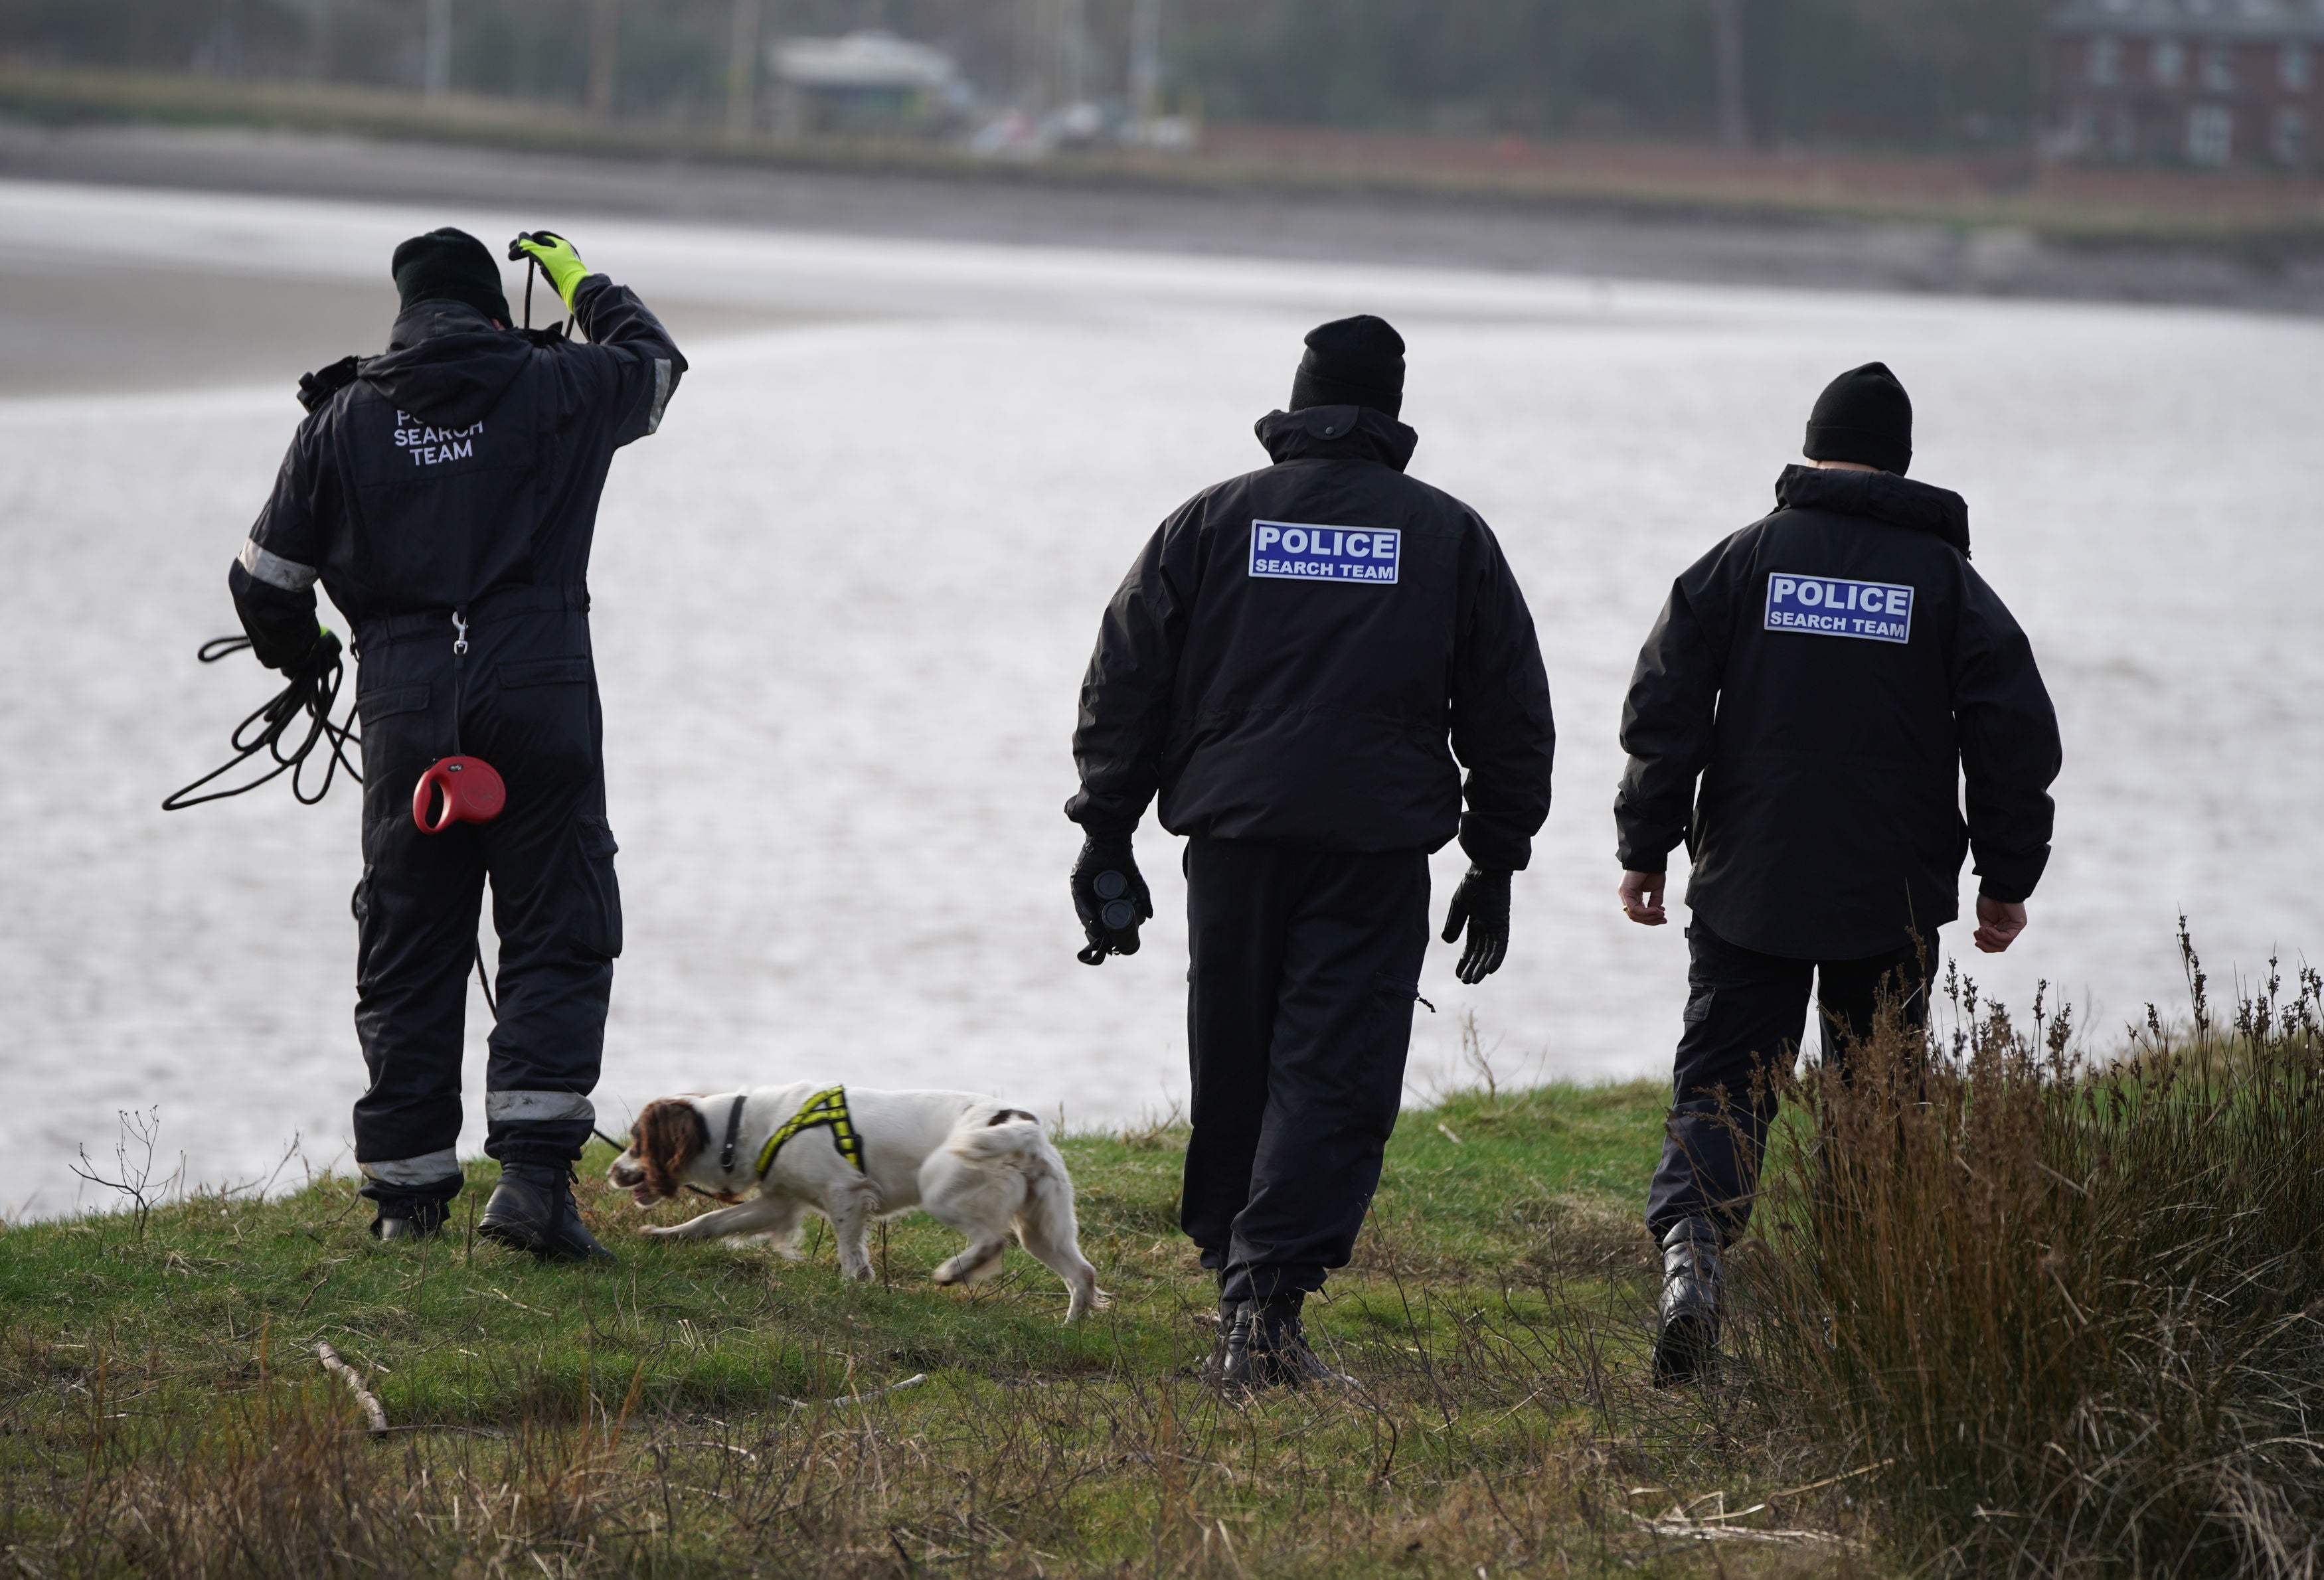 Police search teams on the banks of the River Wyre in Hambleton, Lancashire searching for any sign of Nicola Bulley.